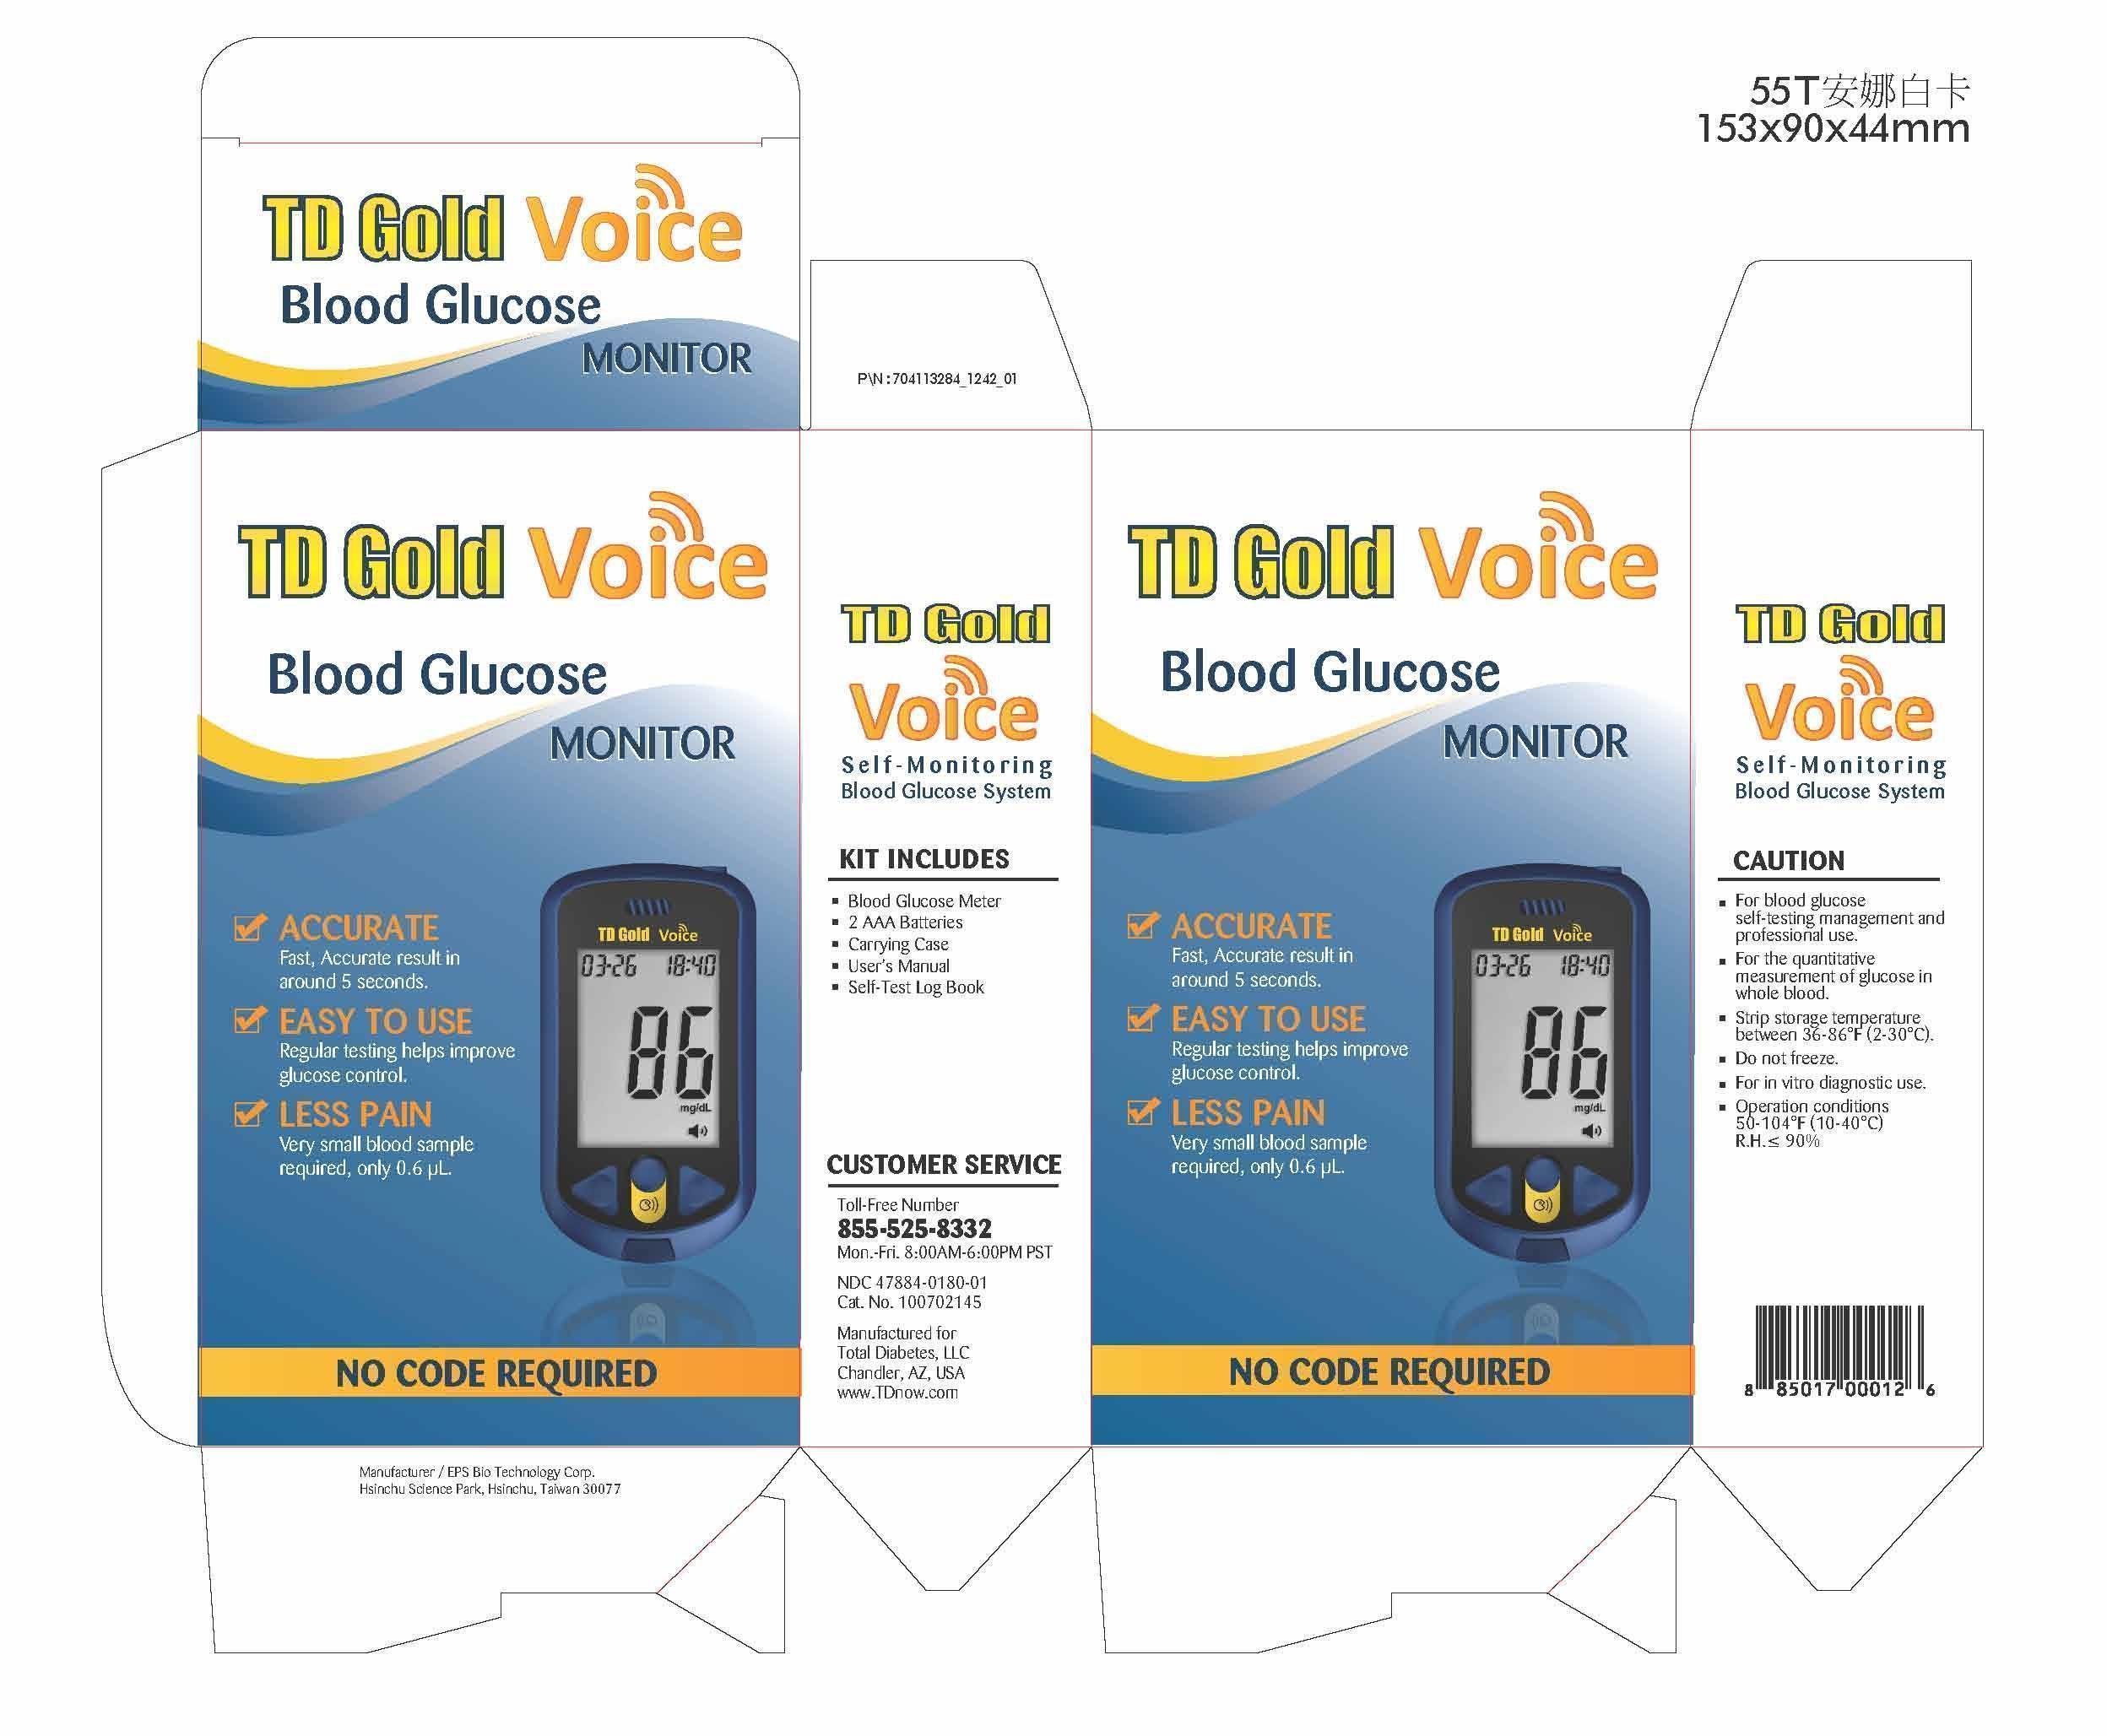 TD Gold Voice Blood Glucose Monitor